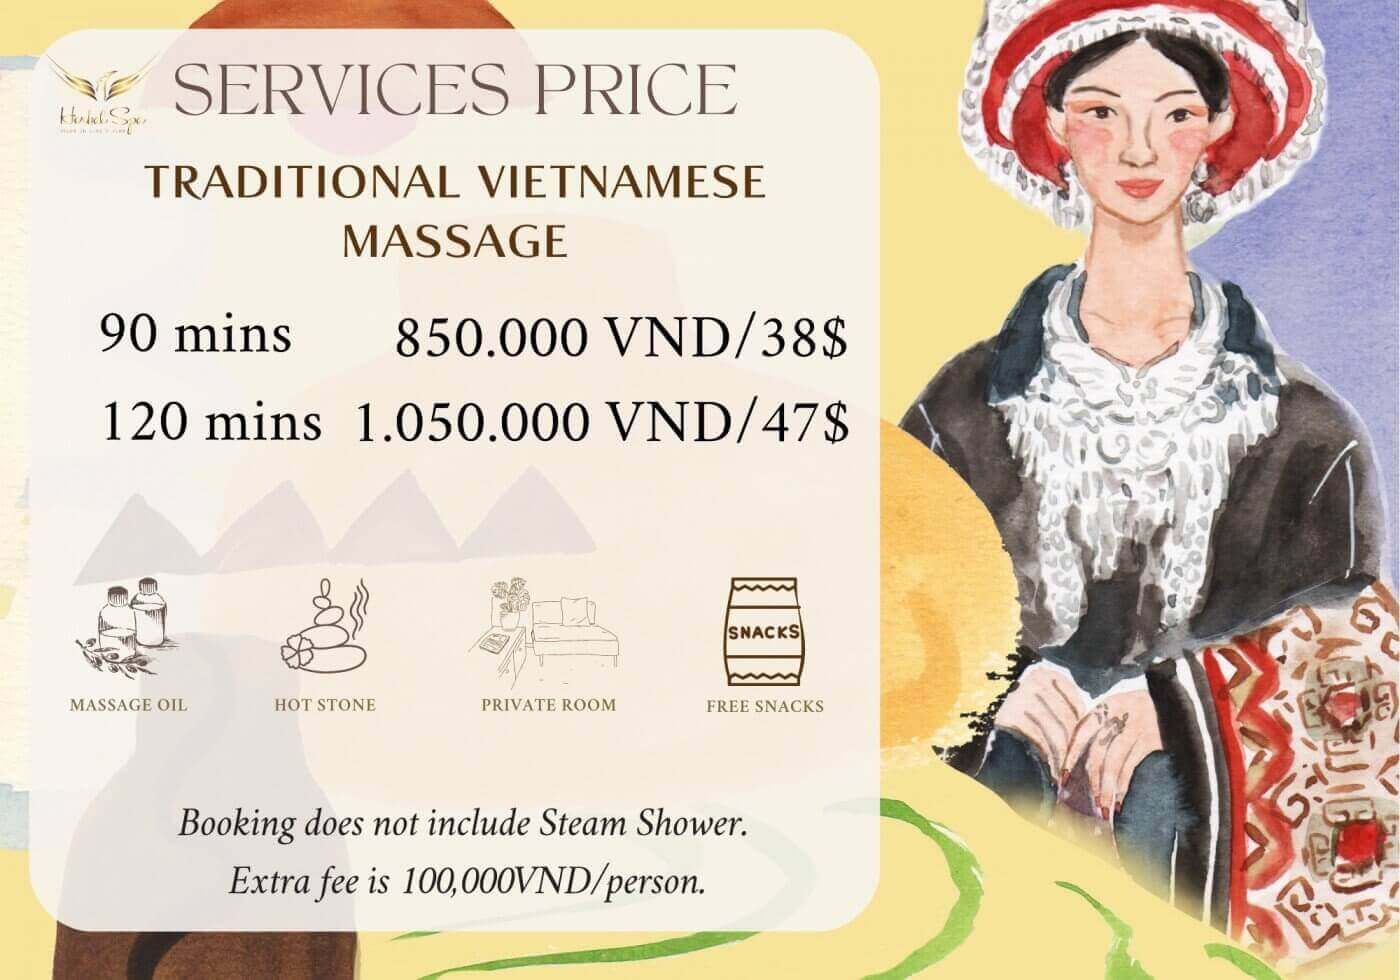 Price list for Vietnamese traditional massage services at Herbal Spa Da Nang